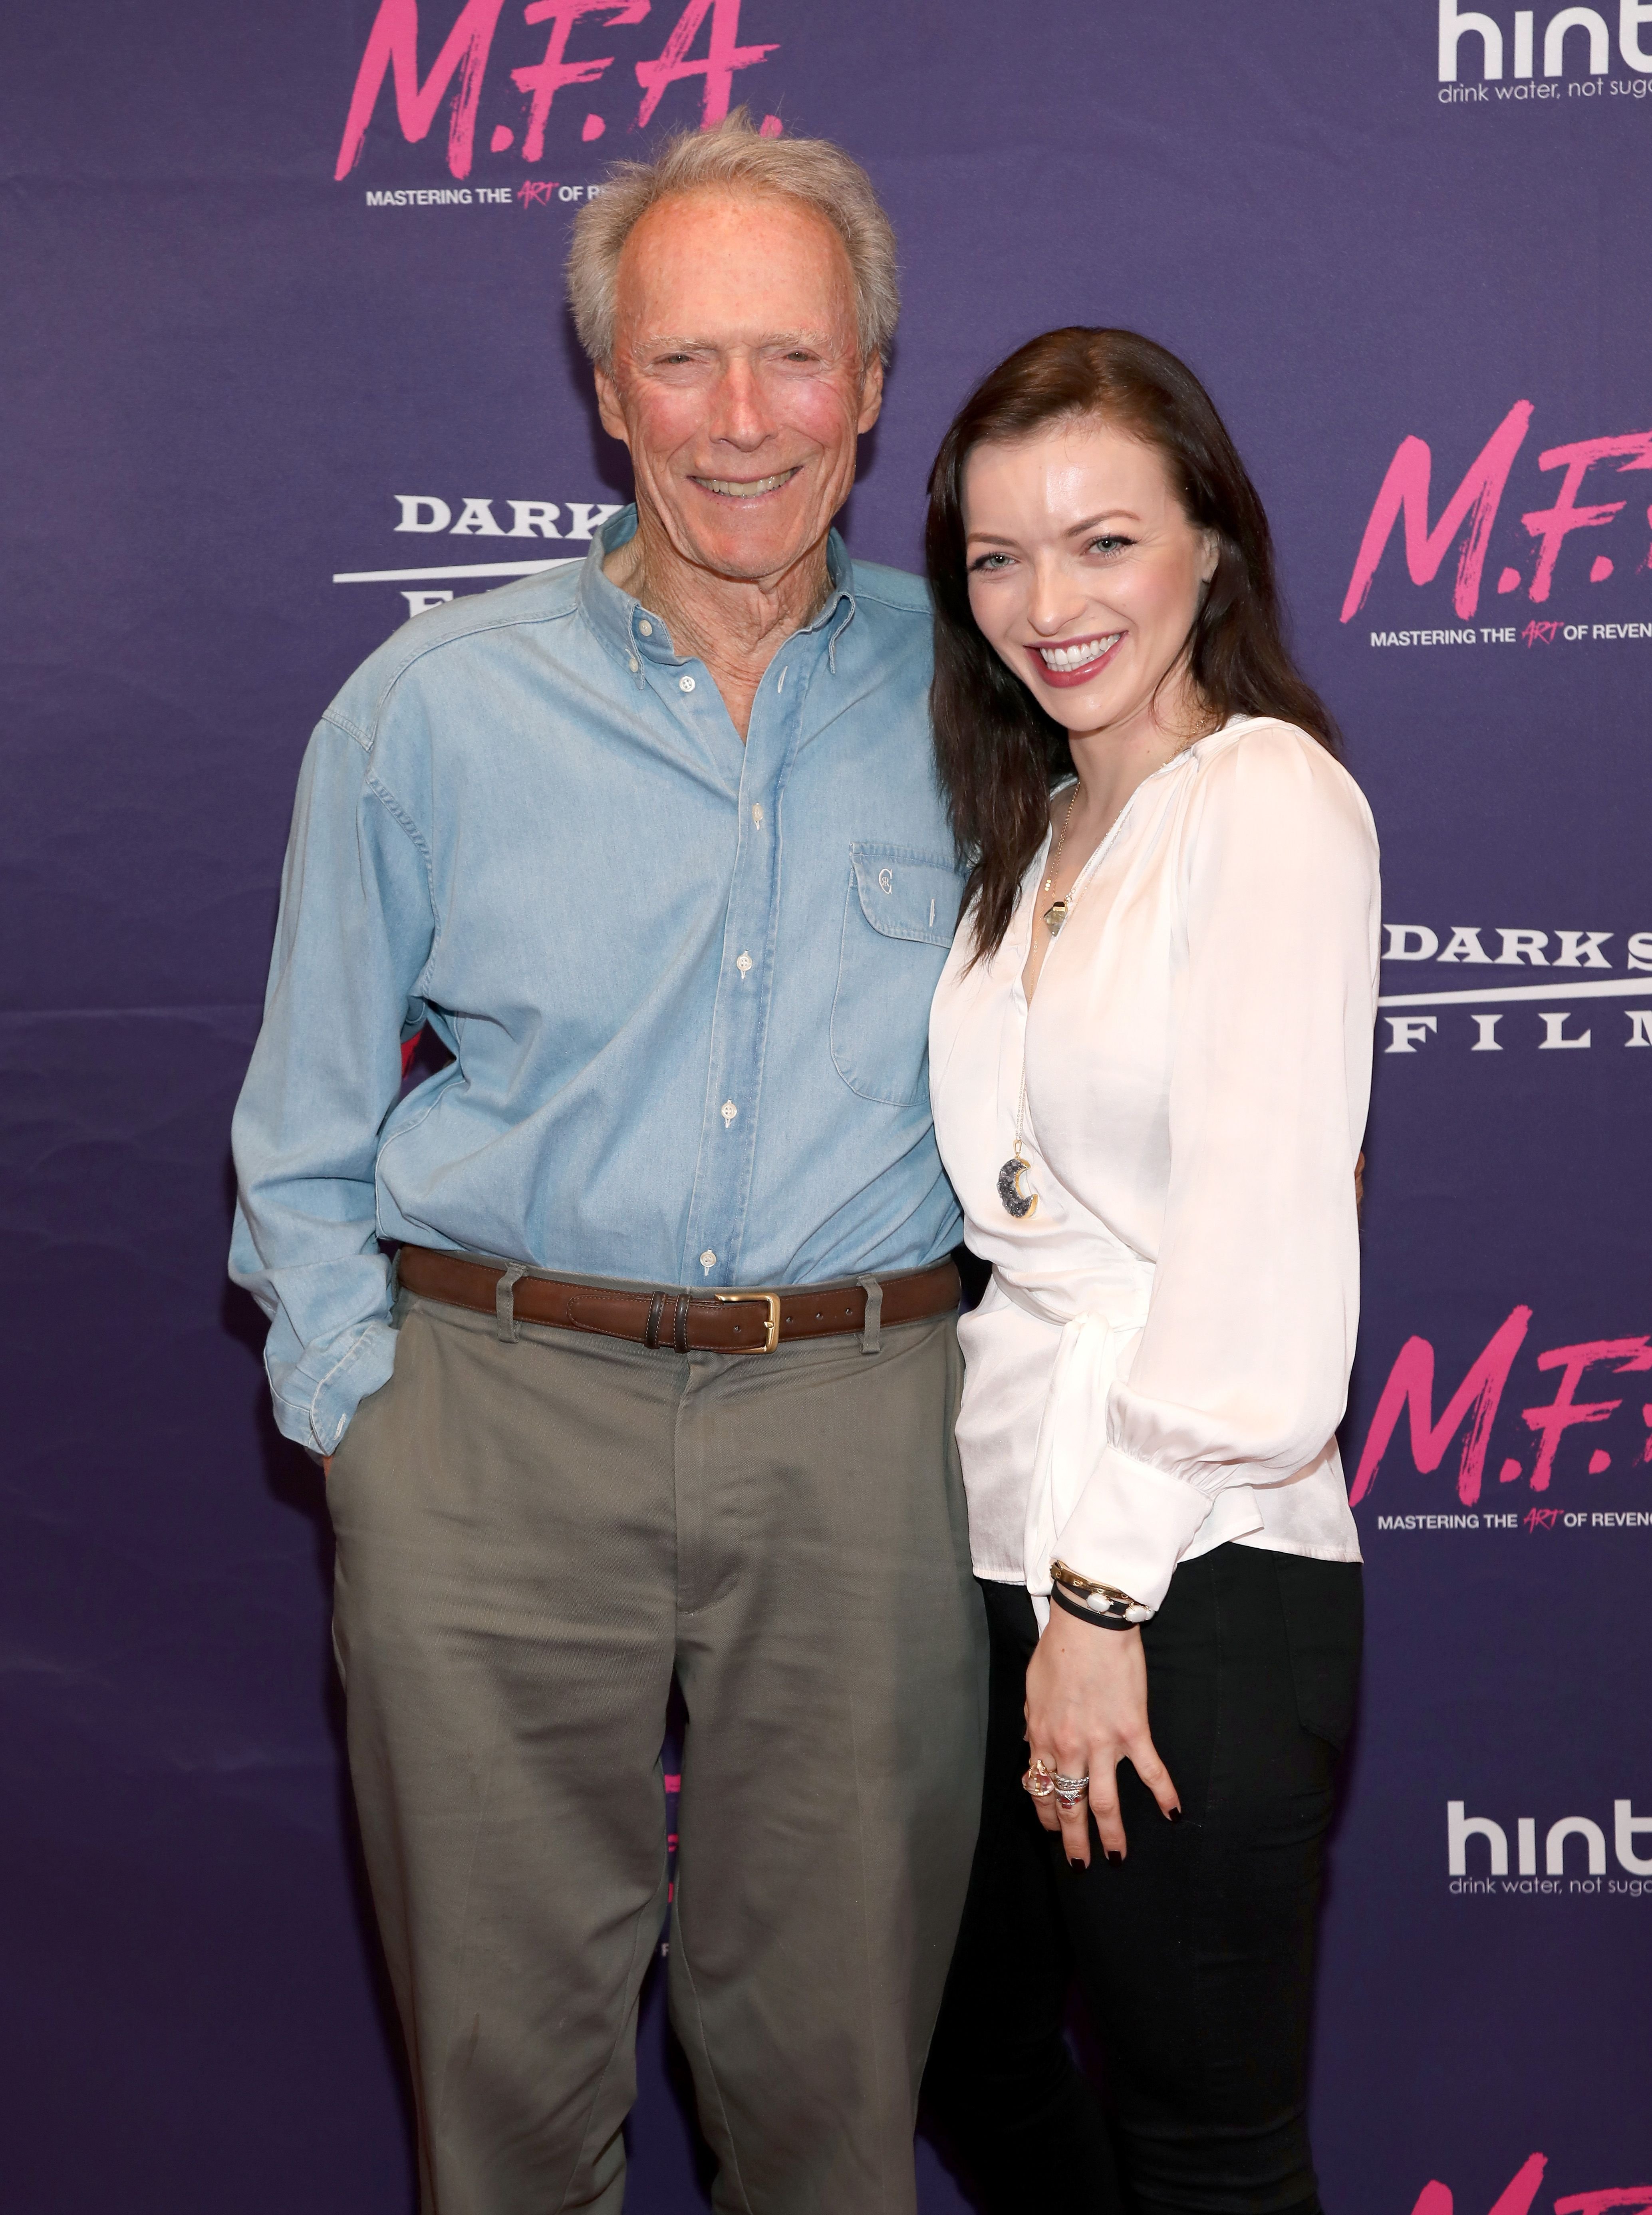 Actor Clint Eastwood poses with his daughter Francesca Eastwood at the Premiere Of Dark Sky Films' "M.F.A." at The London West Hollywood on October 2, 2017 | Photo Getty Images